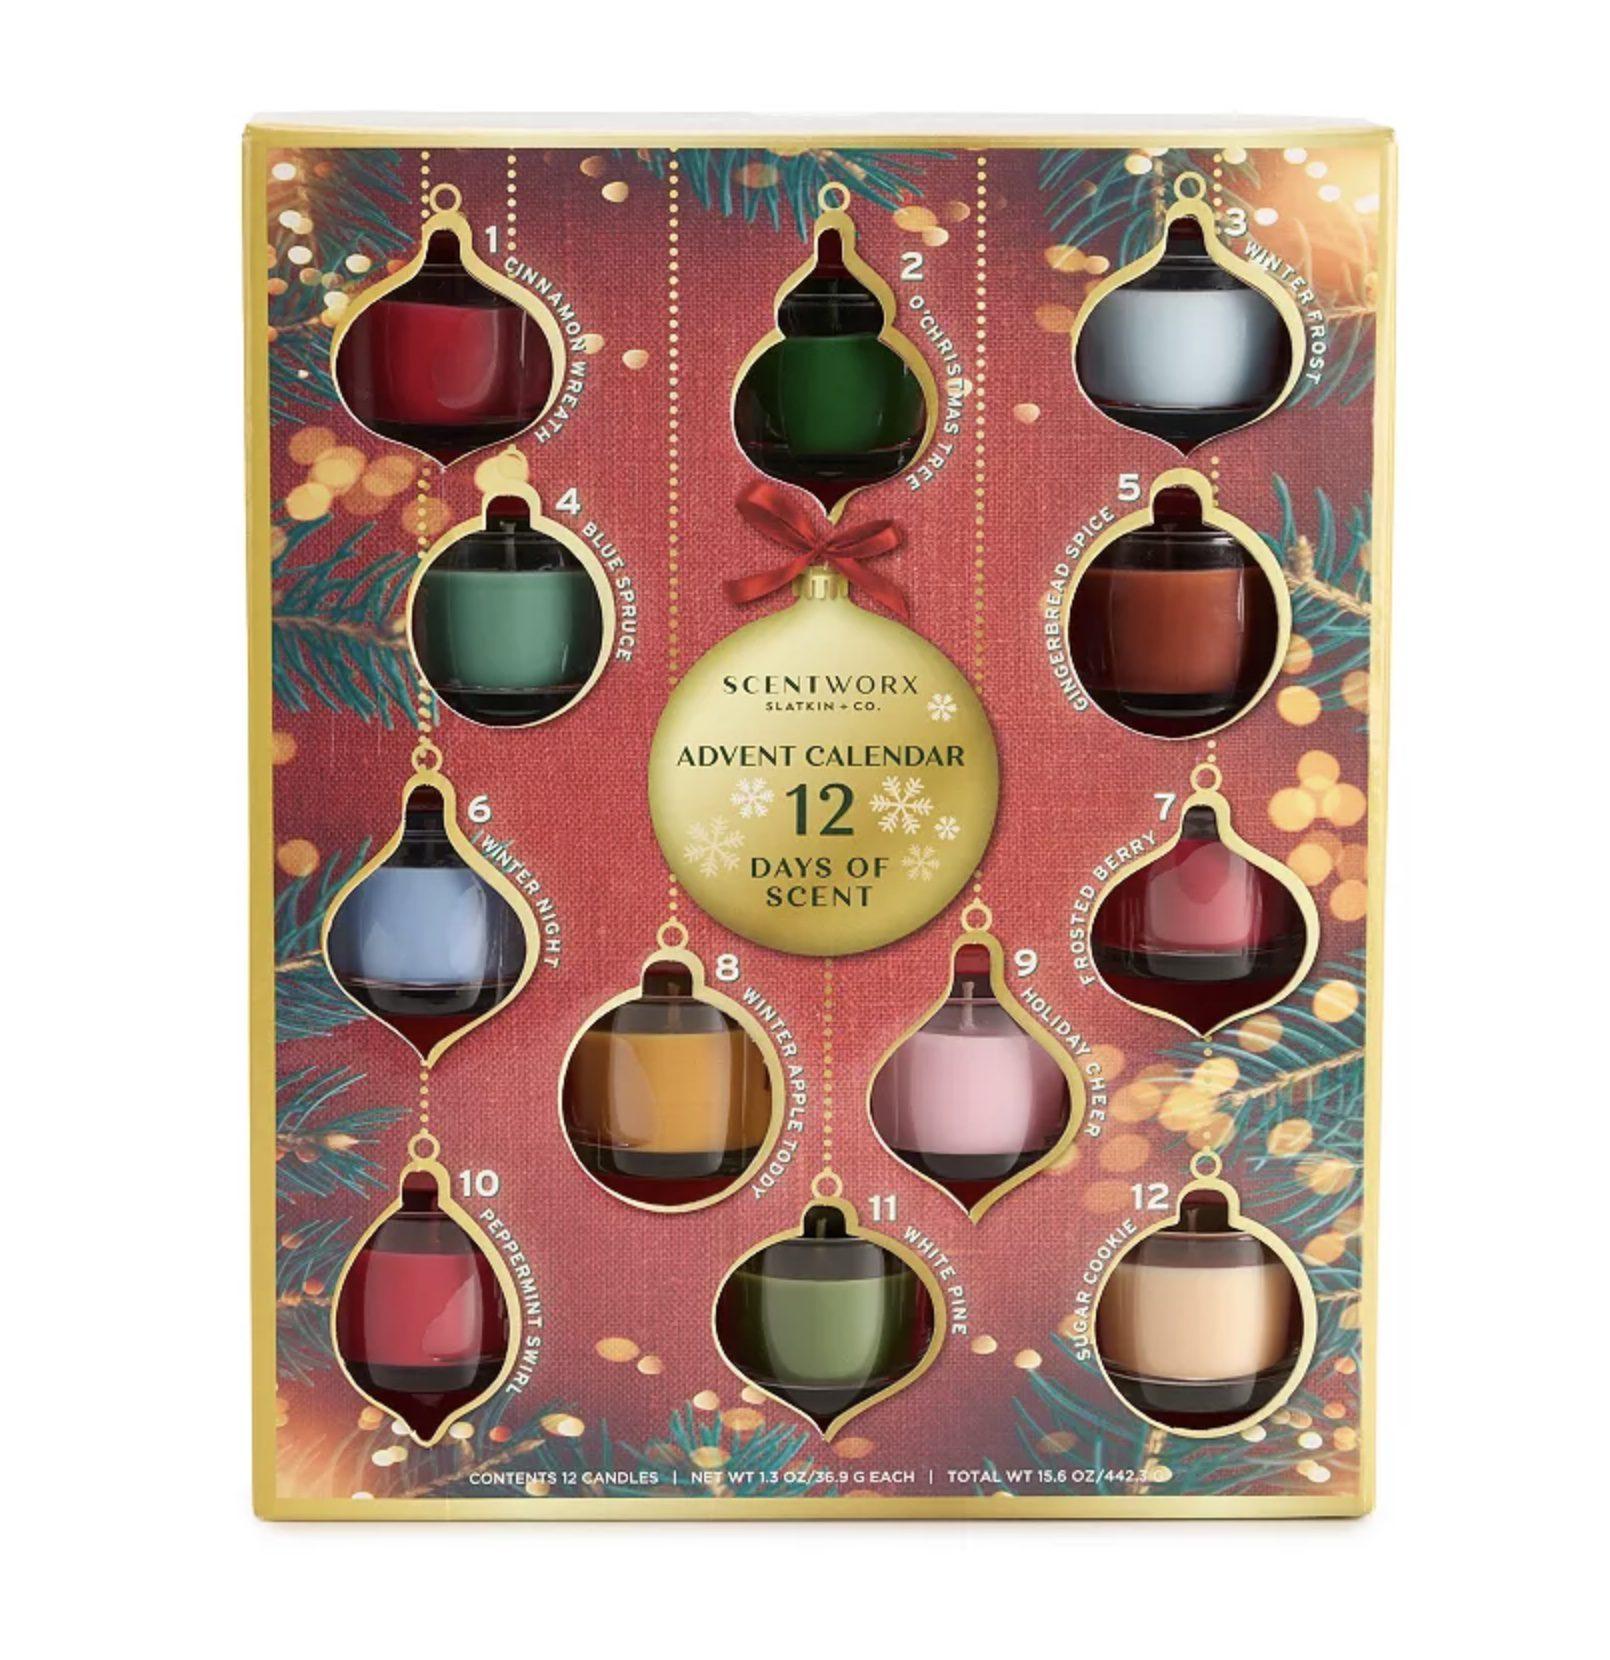 Scentworx Christmas Candle Advent Calendar Subscription Box Ramblings